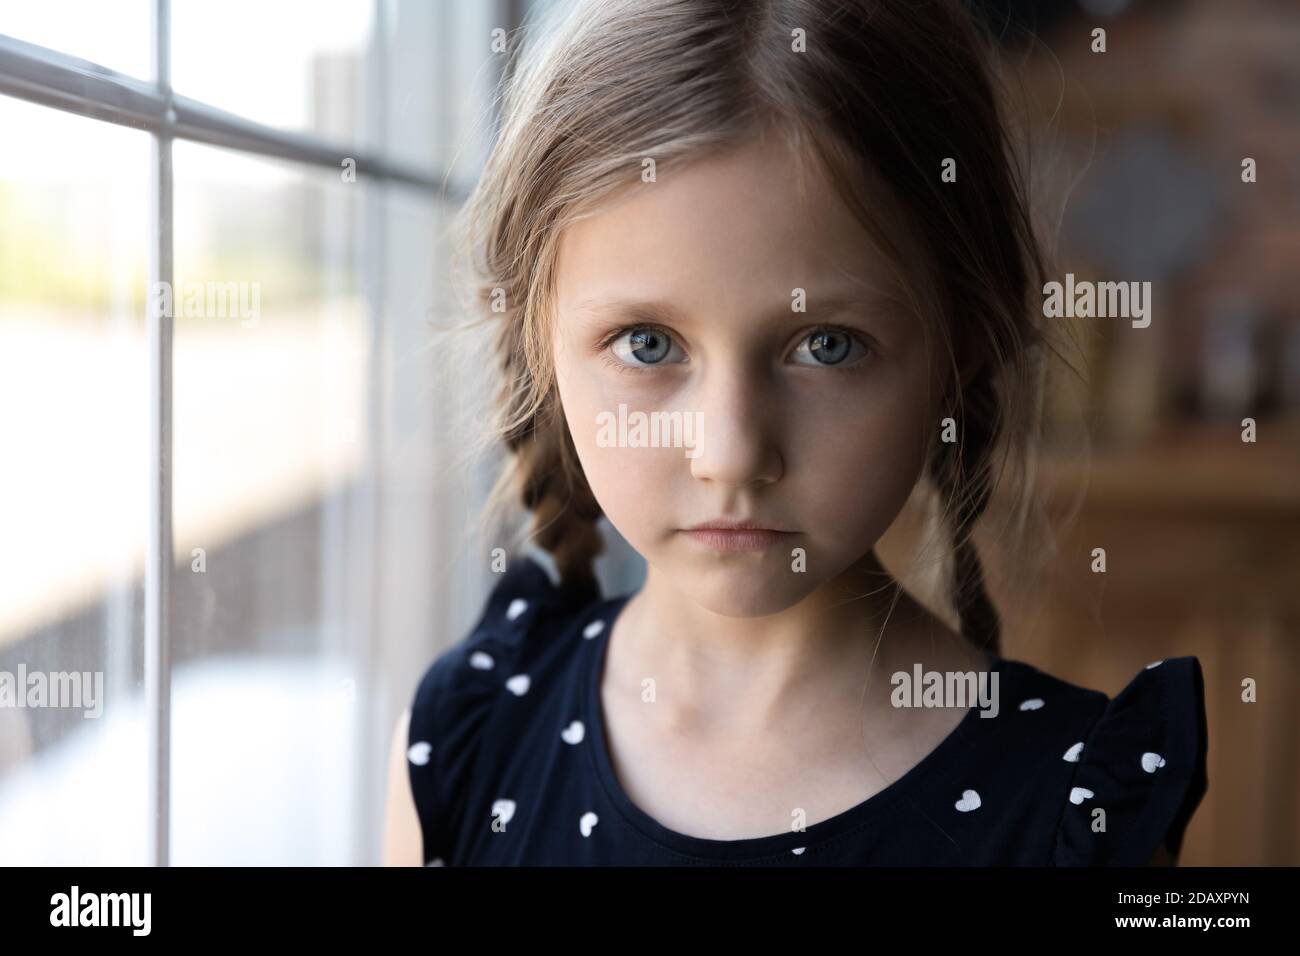 Portrait of serious little school age girl standing by window Stock Photo